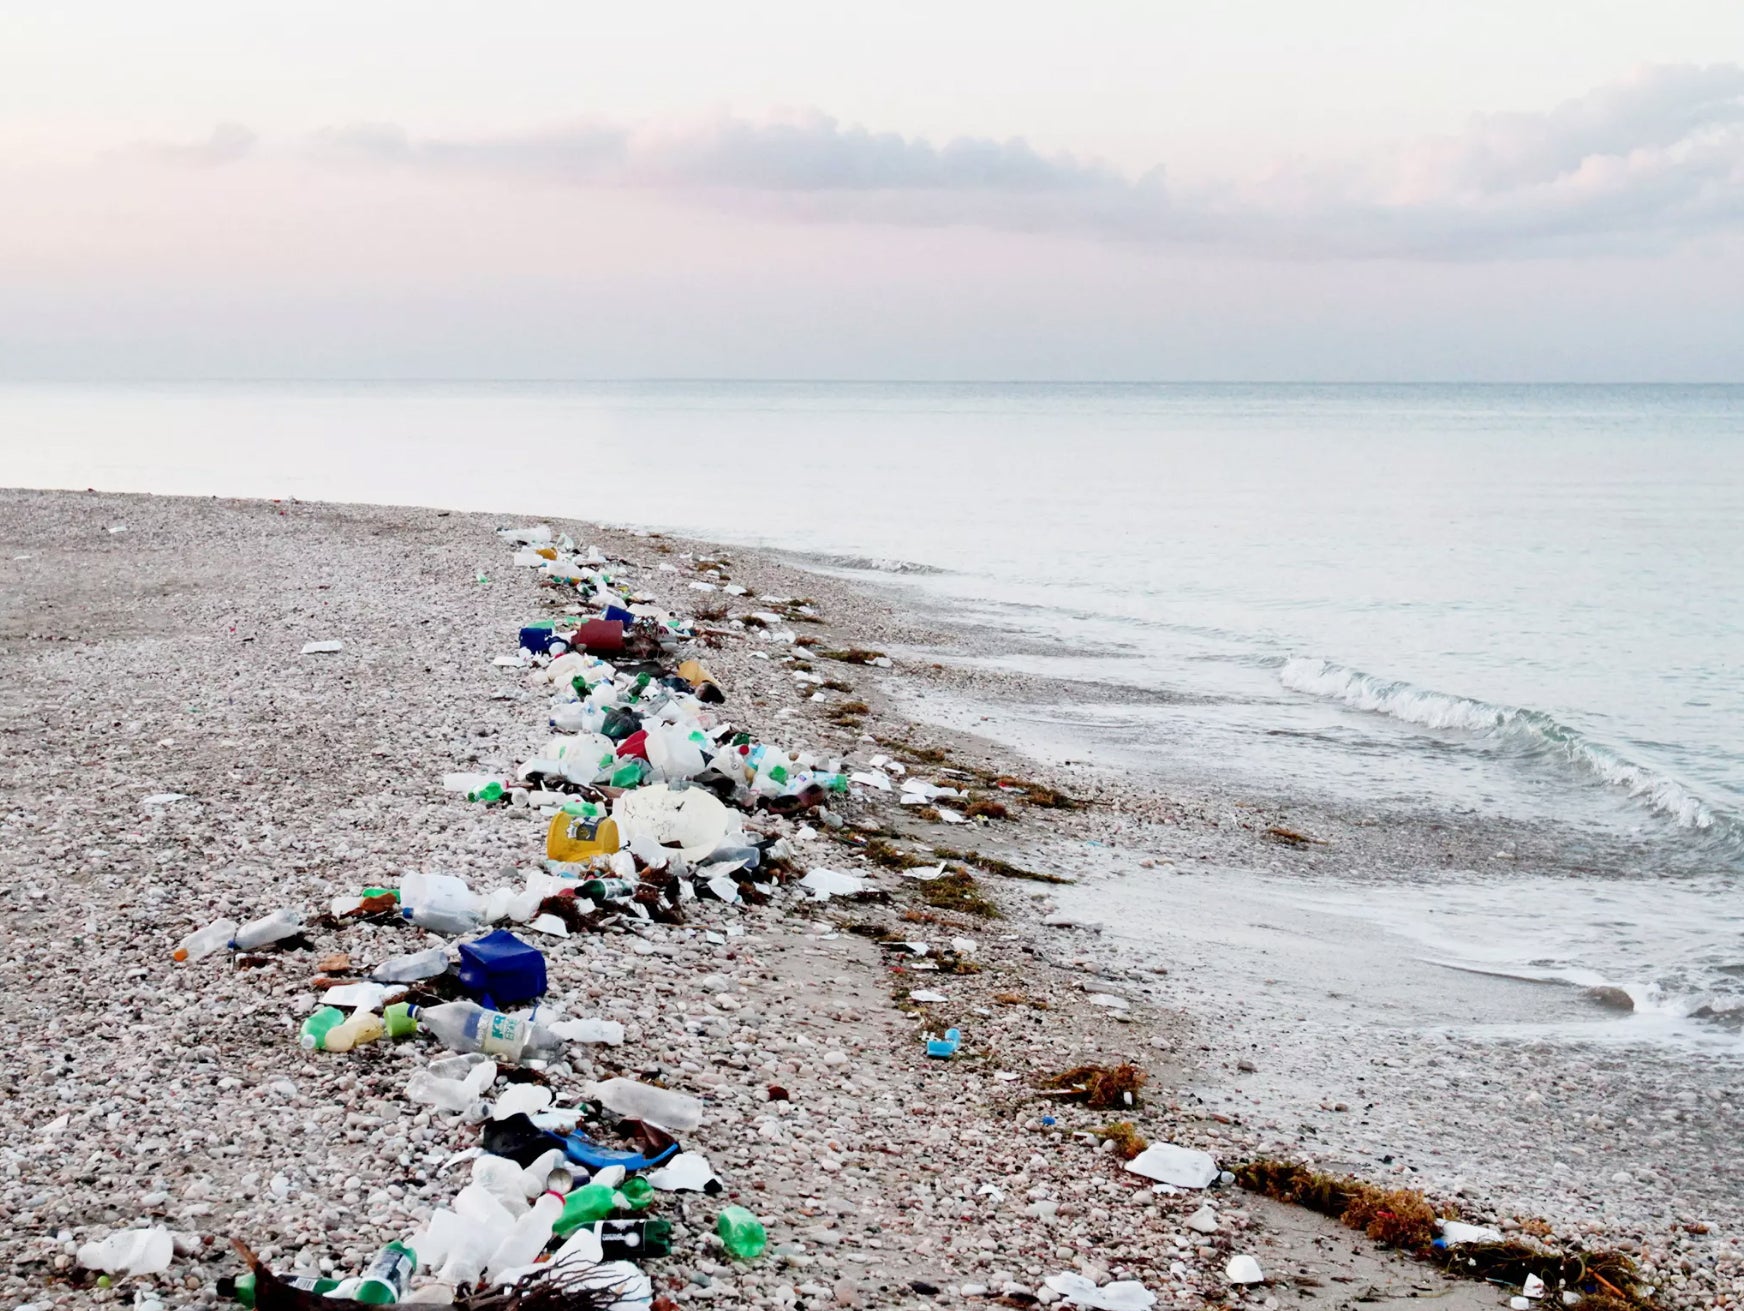 Beach littered in plastic waste. Help keep trash out of our oceans.